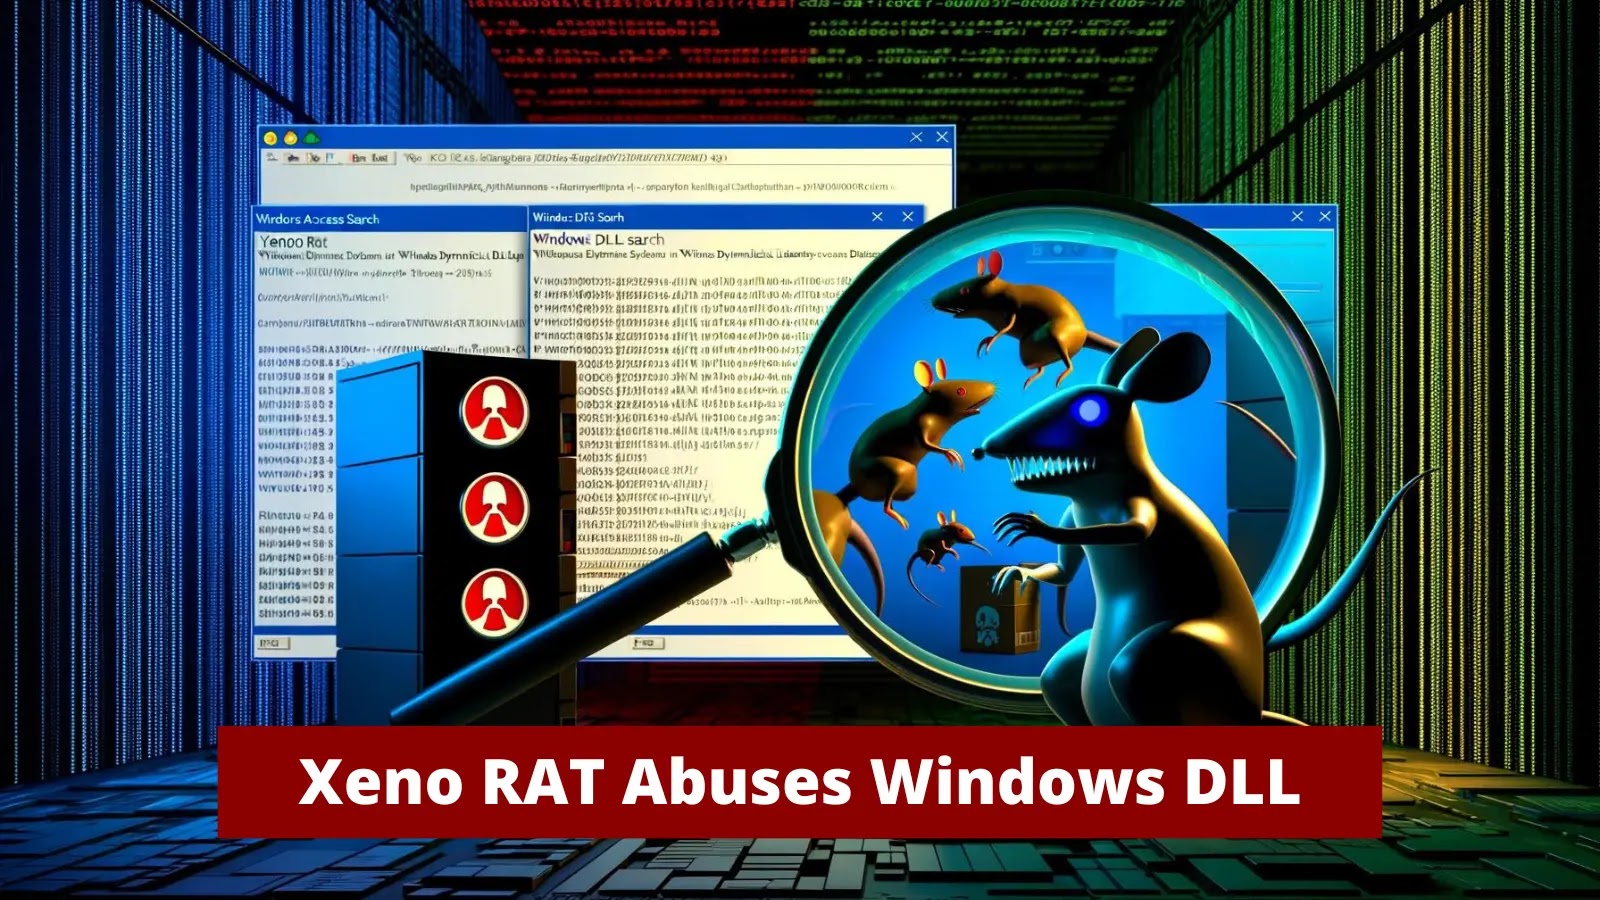 Xeno RAT Abuses Windows DLL Search To Avoid Detection